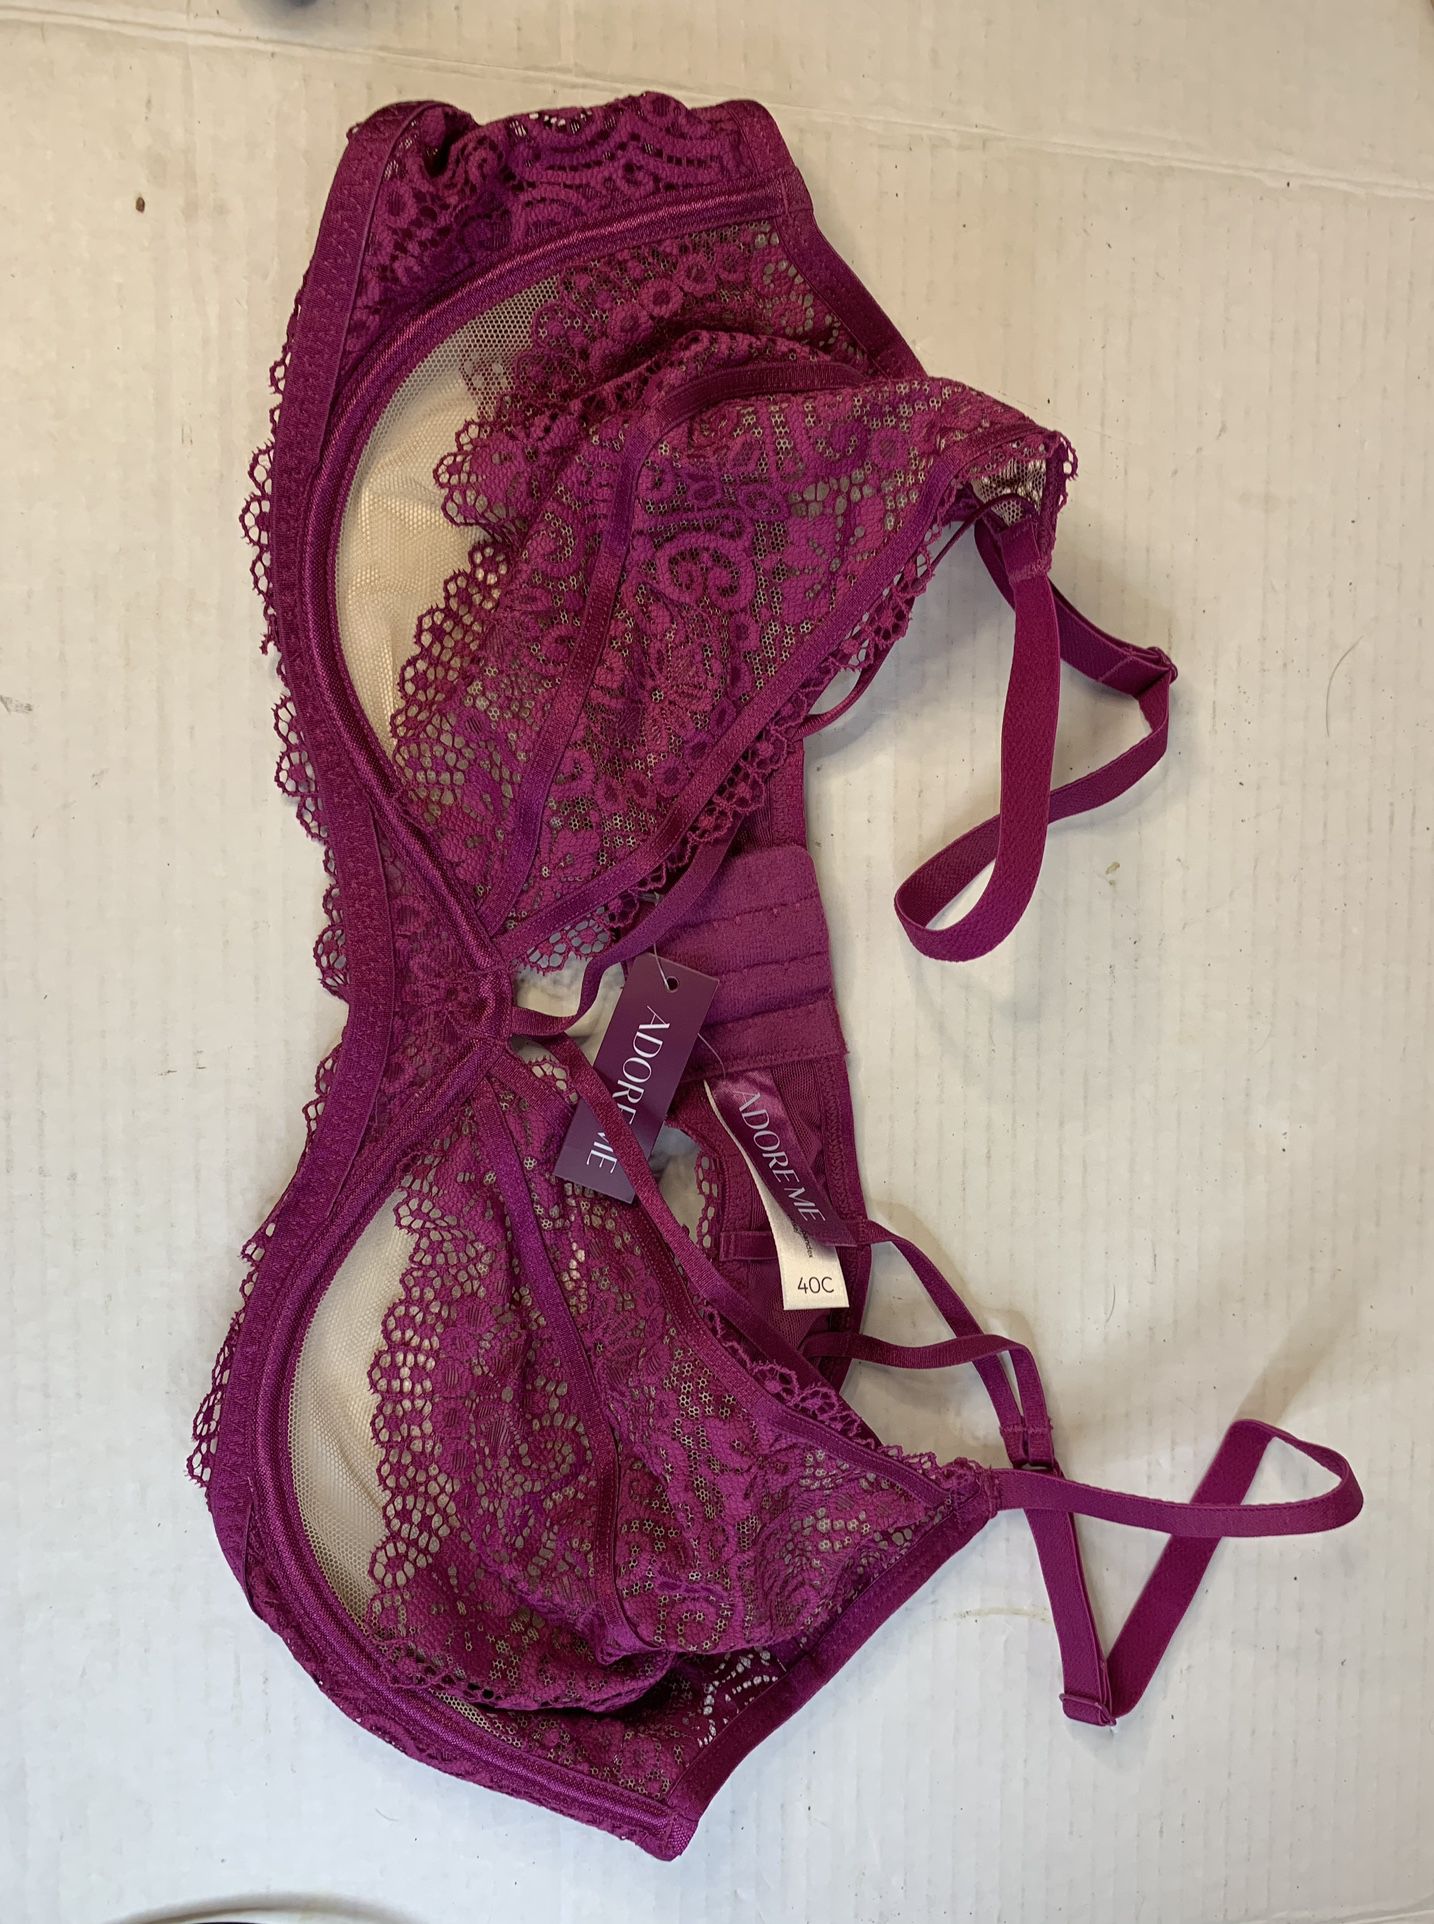 Adore Me Underwire Lacy Bra size 40C Red Lavender Sexy Lace & Mesh  Adjustable for Sale in Powder Springs, GA - OfferUp